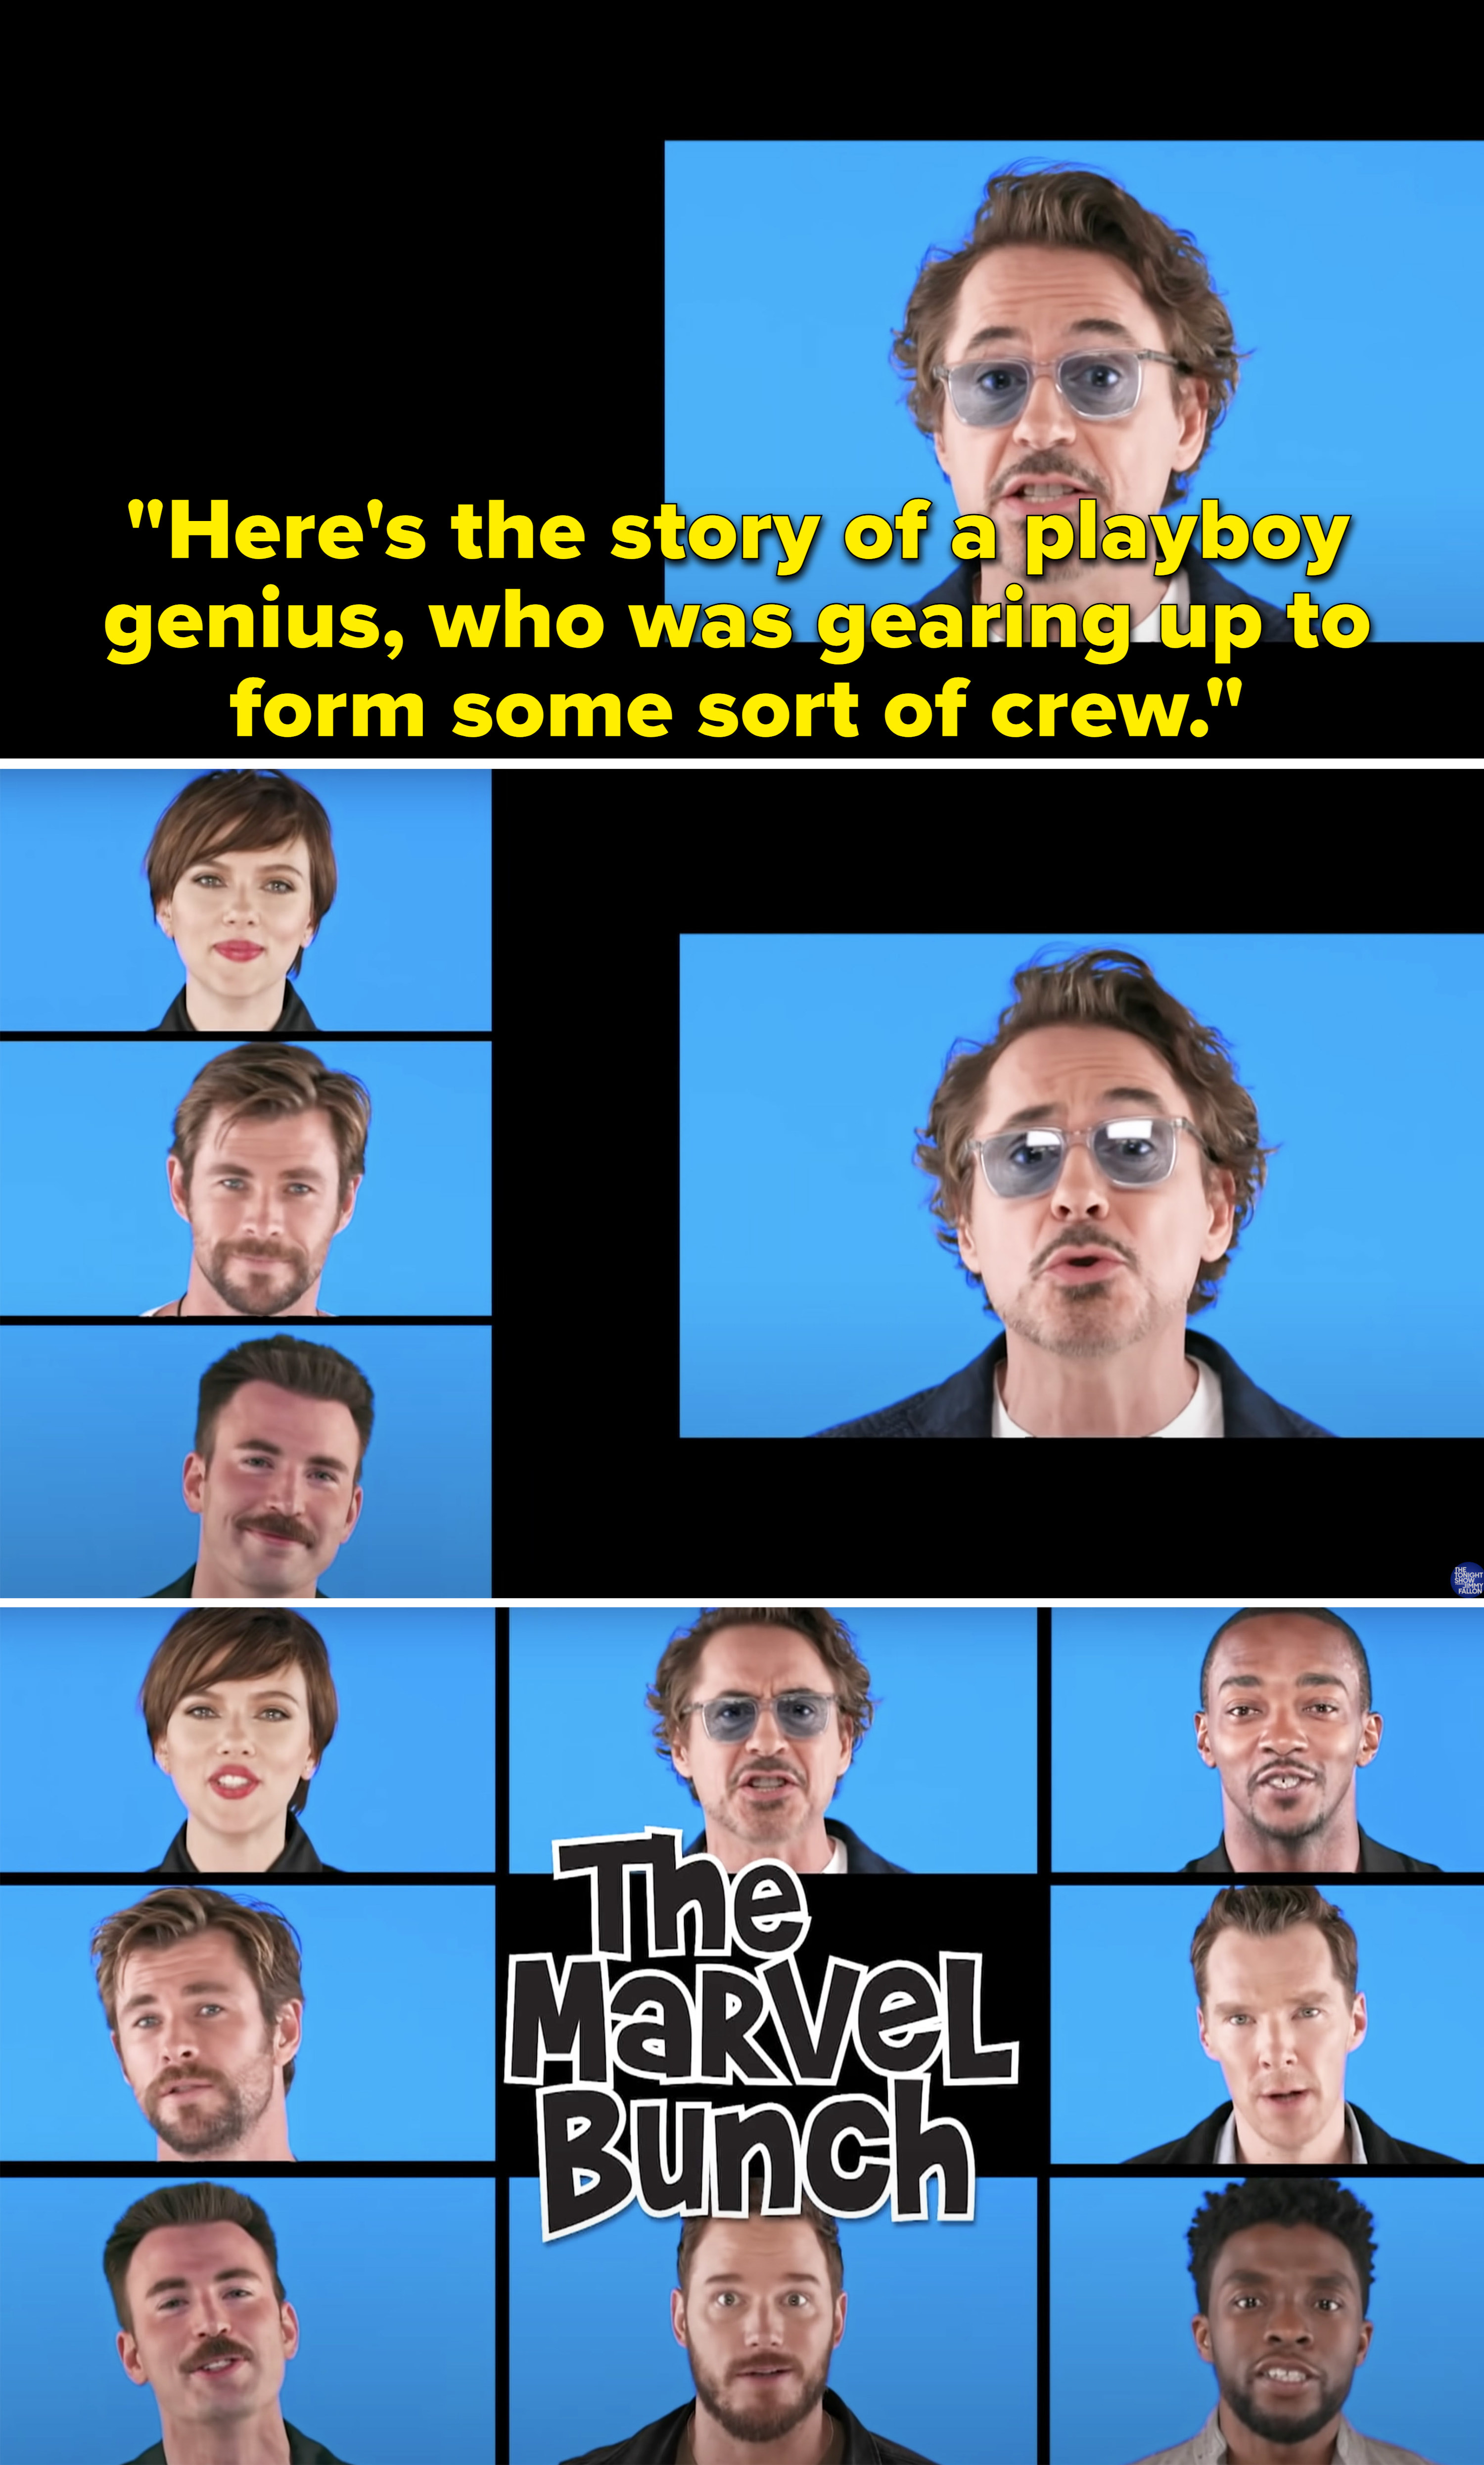 Robert Downey Jr singing, &quot;Here&#x27;s the story of a playboy genius, who was gearing up to form some sort of crew&quot;